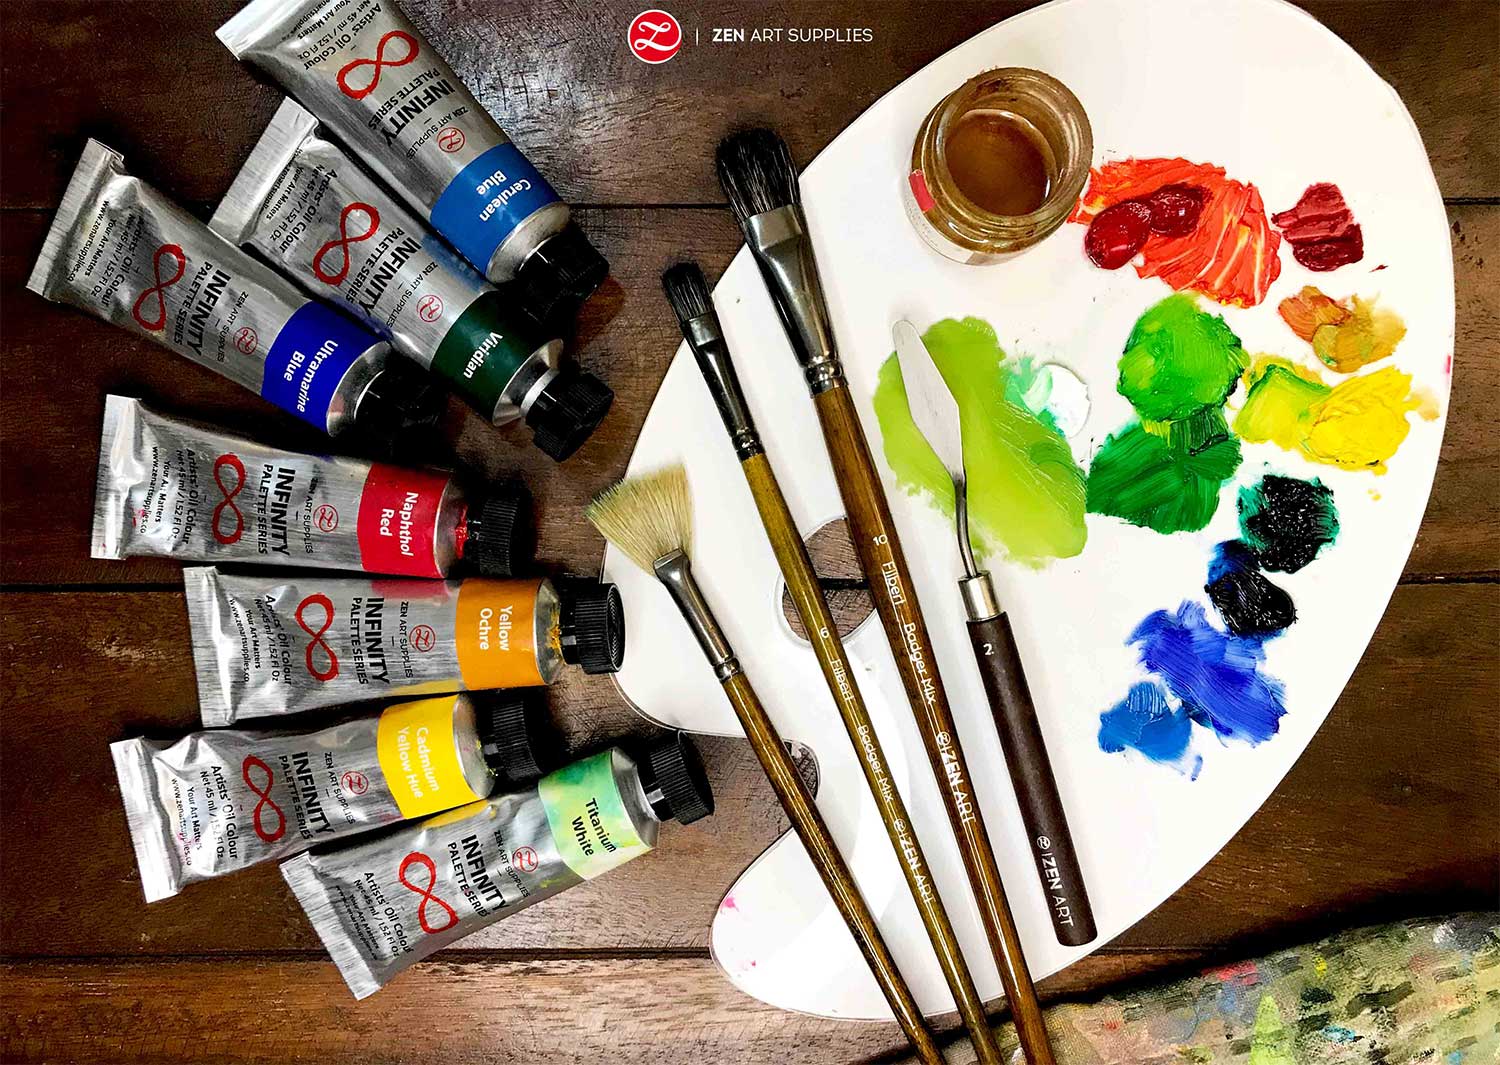 Used Paint Brushes On A Colorful Painter Palette Stock Photo